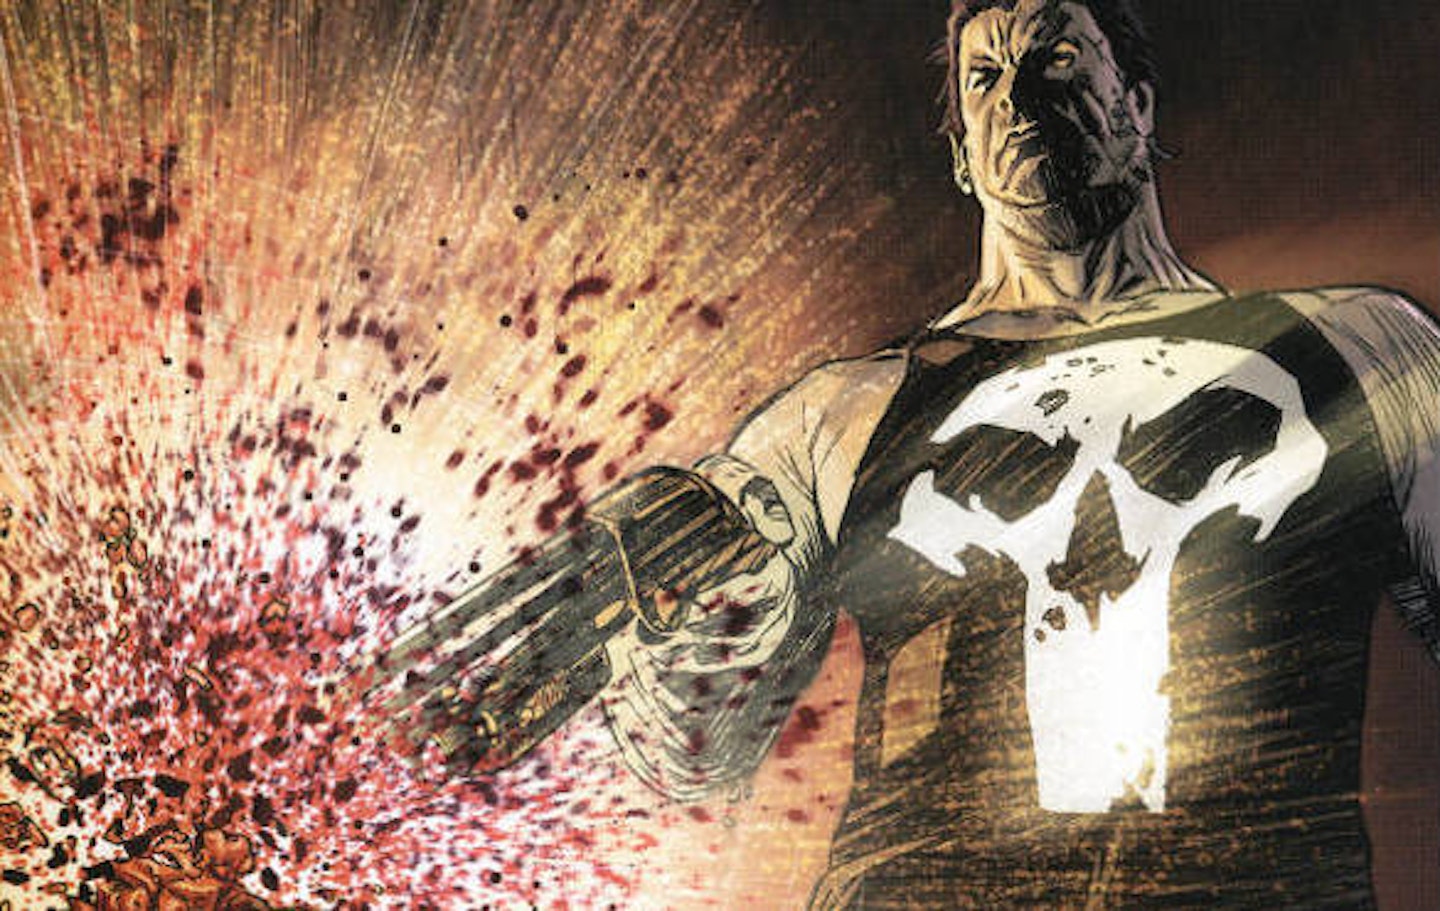 The Punisher: a complete history, Movies